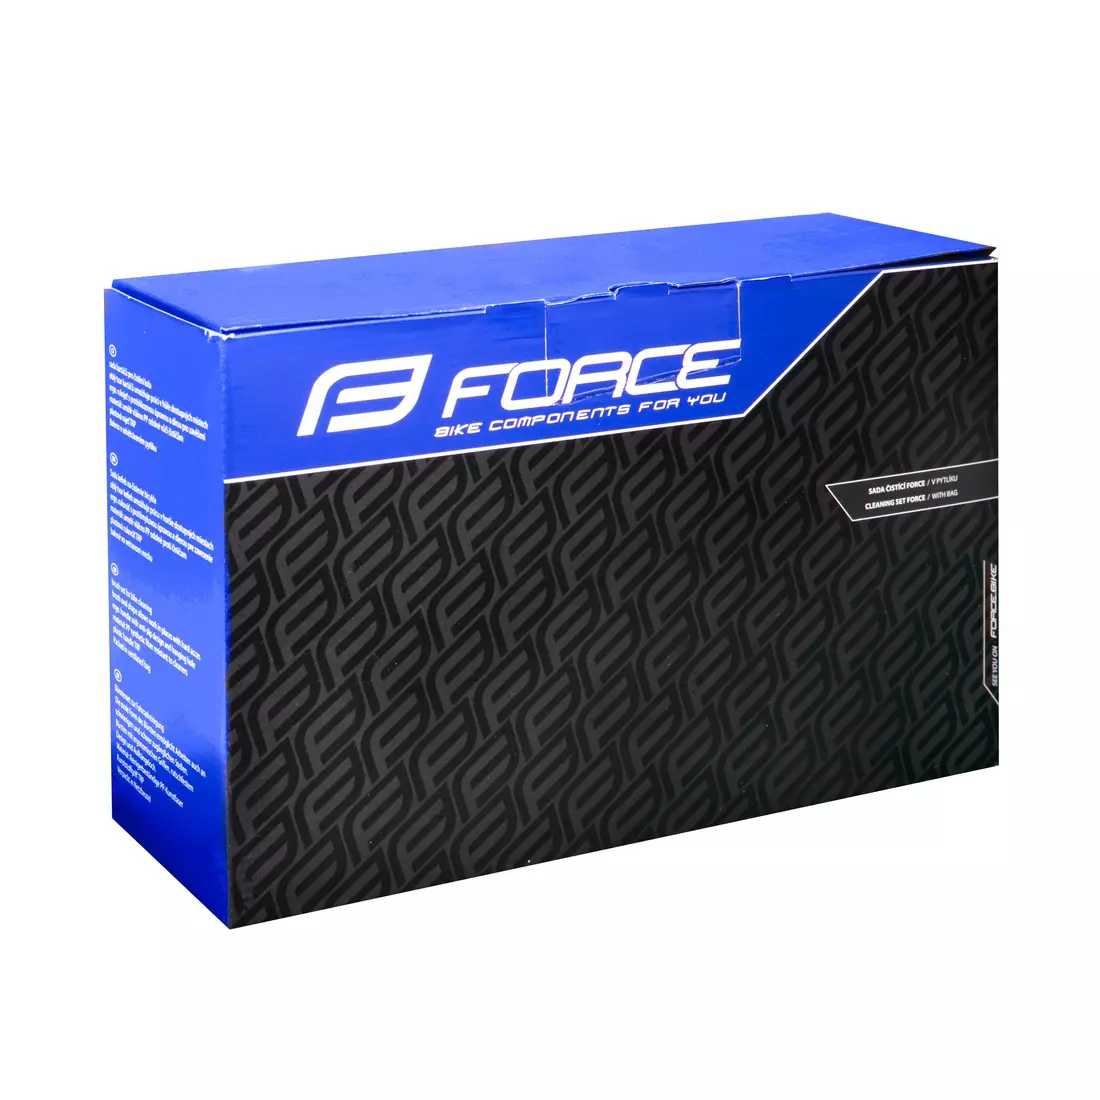 FORCE bicycle cleaning kit ECO 894591